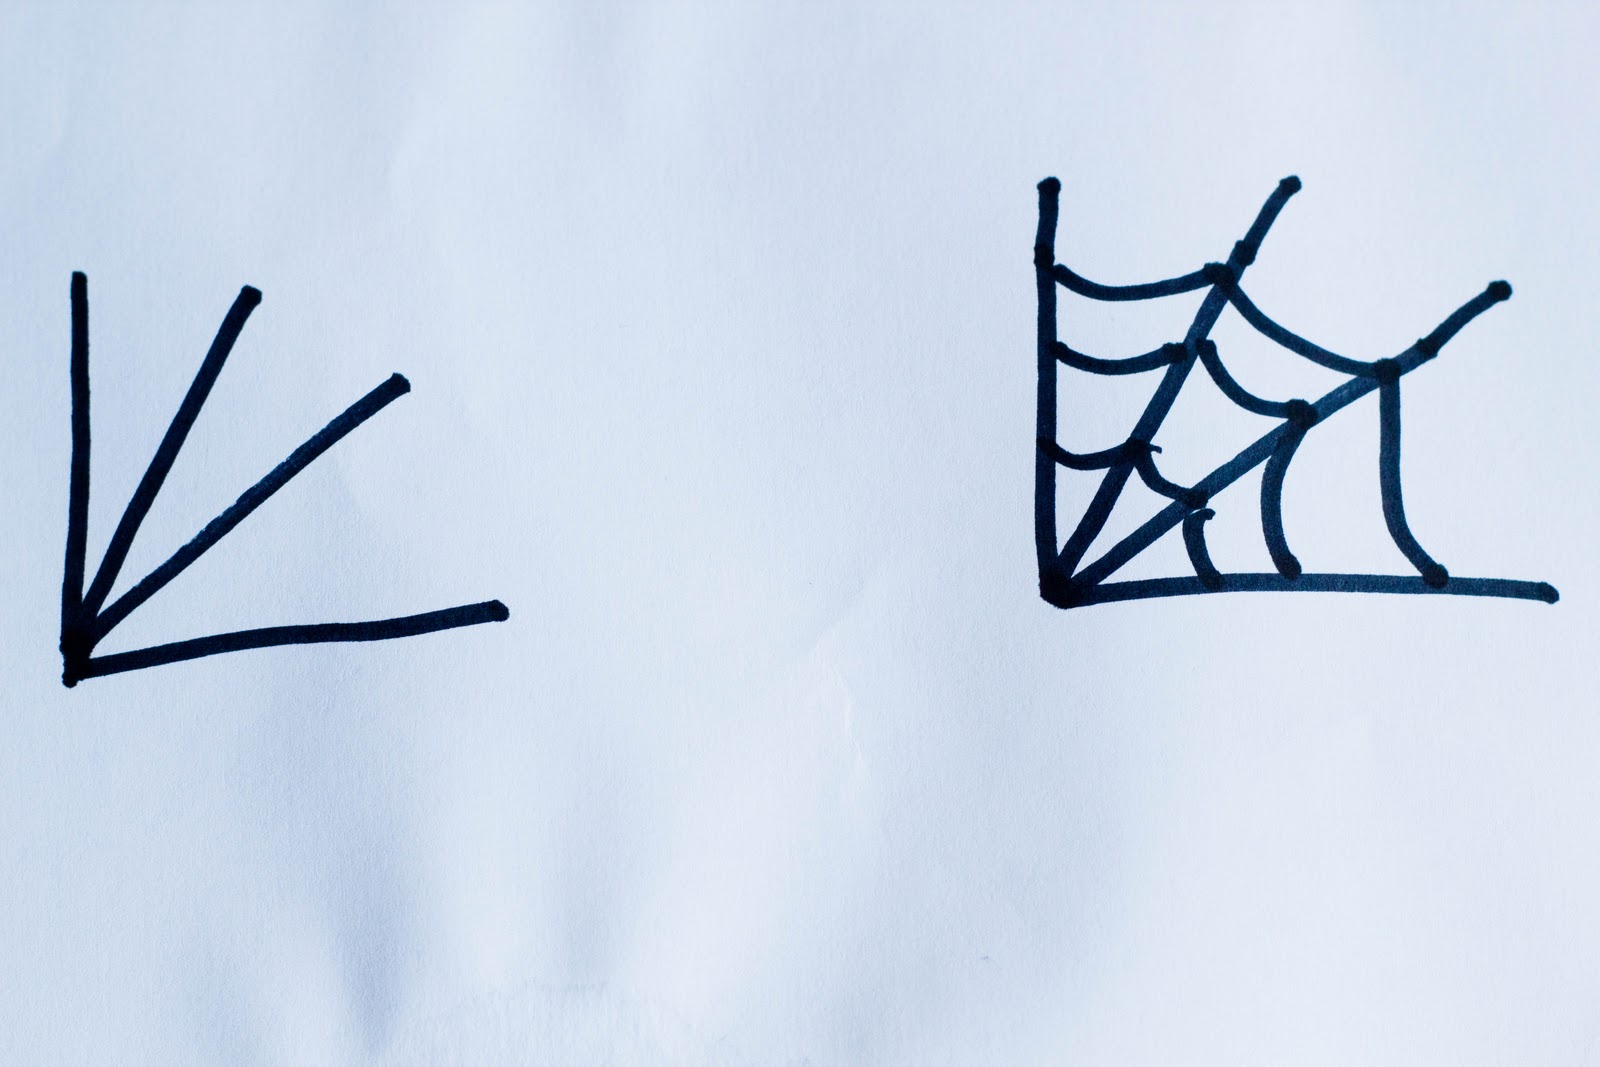 simple-spider-web-drawing-at-getdrawings-free-download